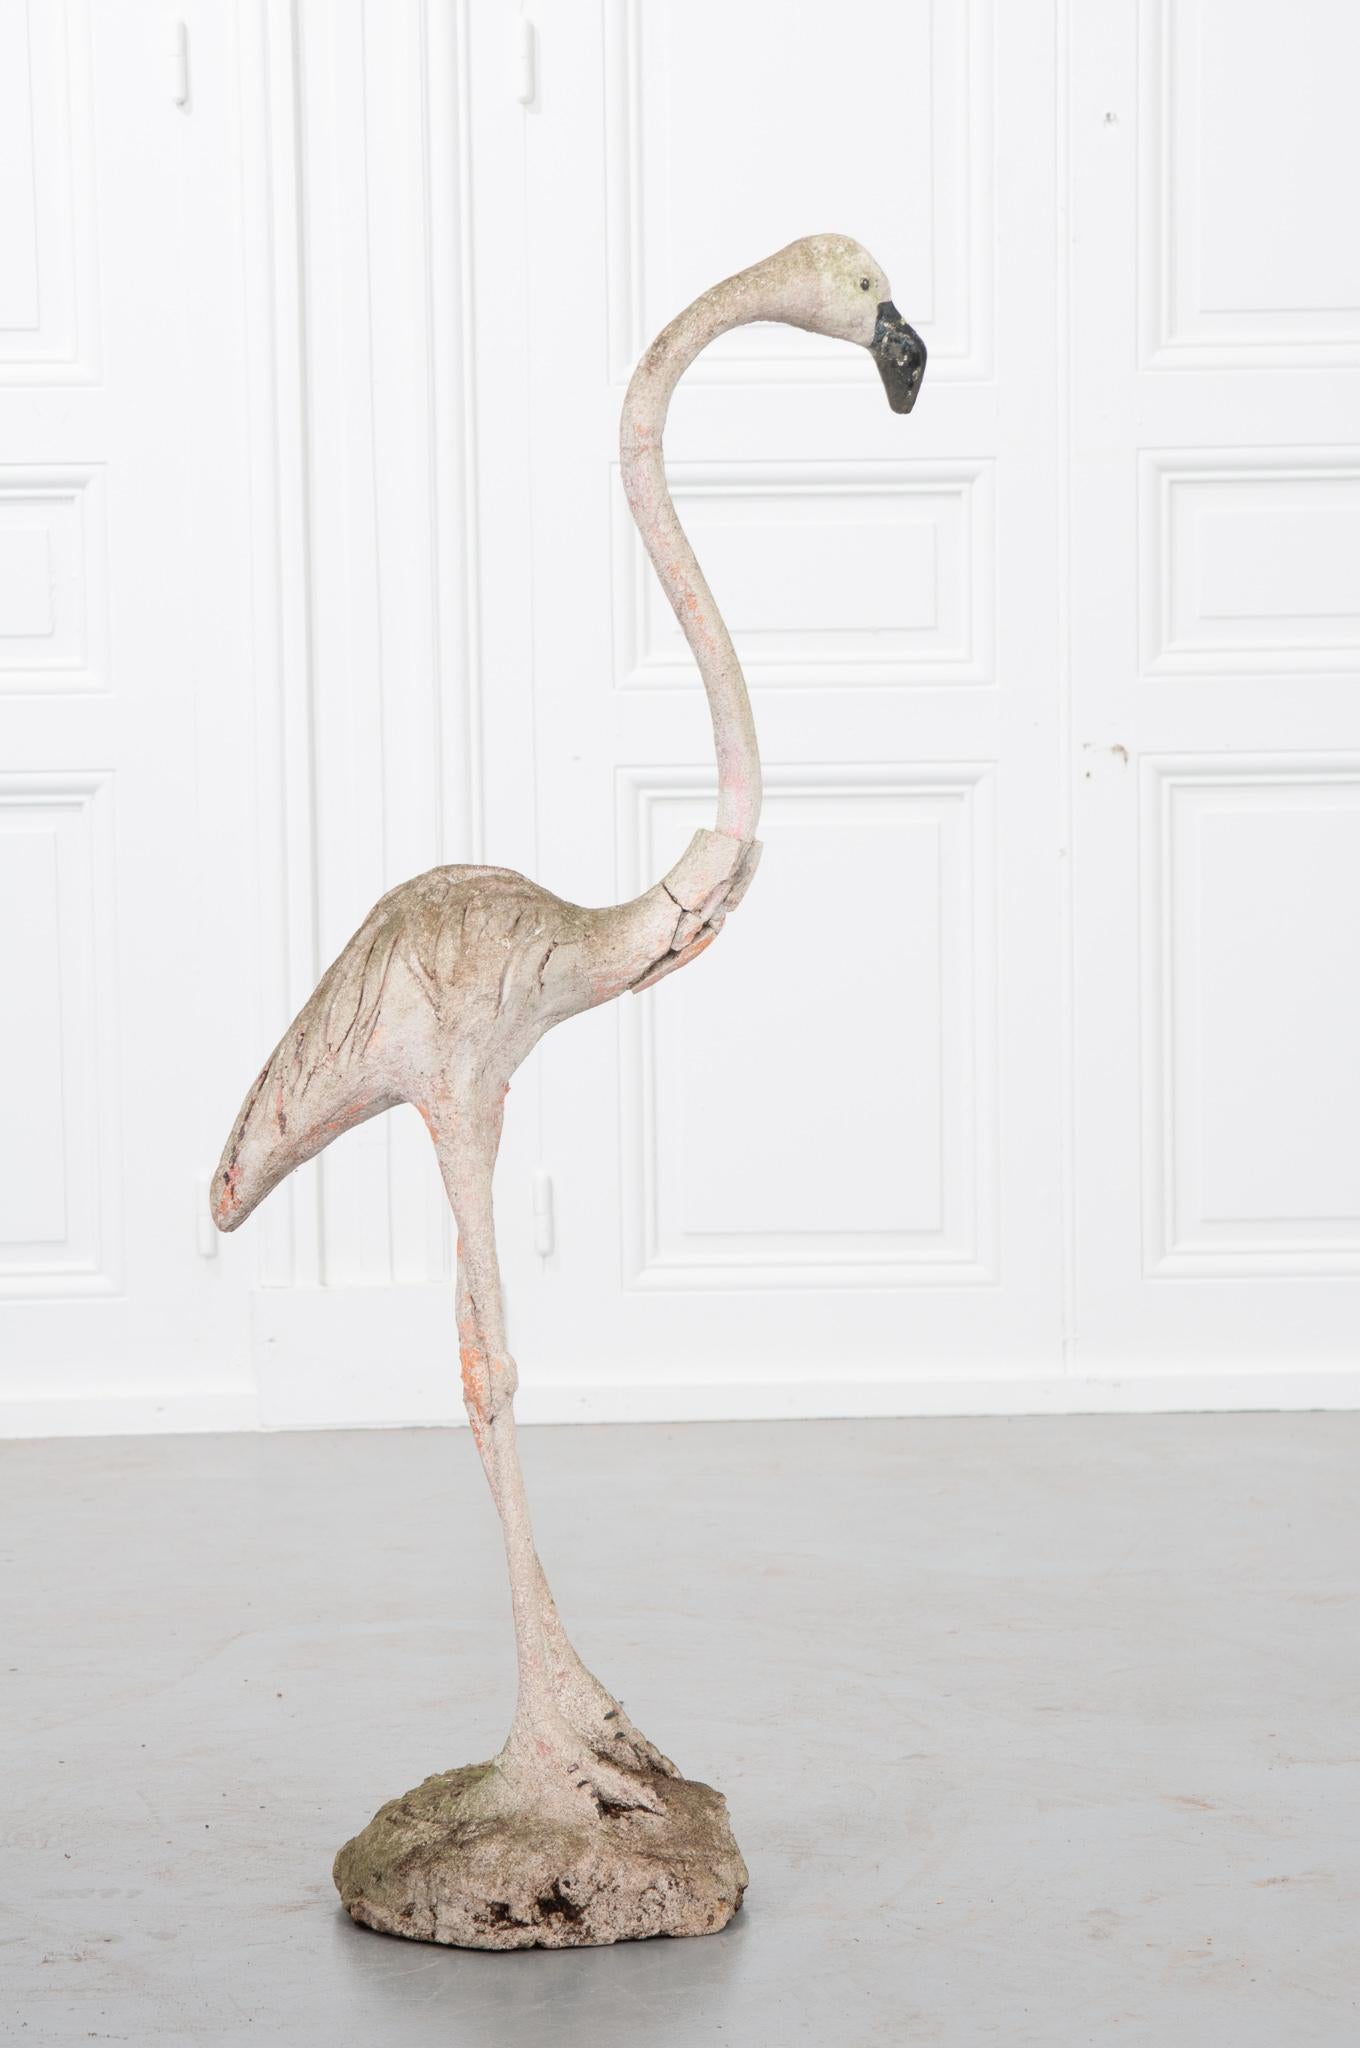 Tall flamingo of metal with cast stone. Seems the flamingo was once painted pink and has lost its color over time due to exposure. Missing part of his neck but still looking great for its age.